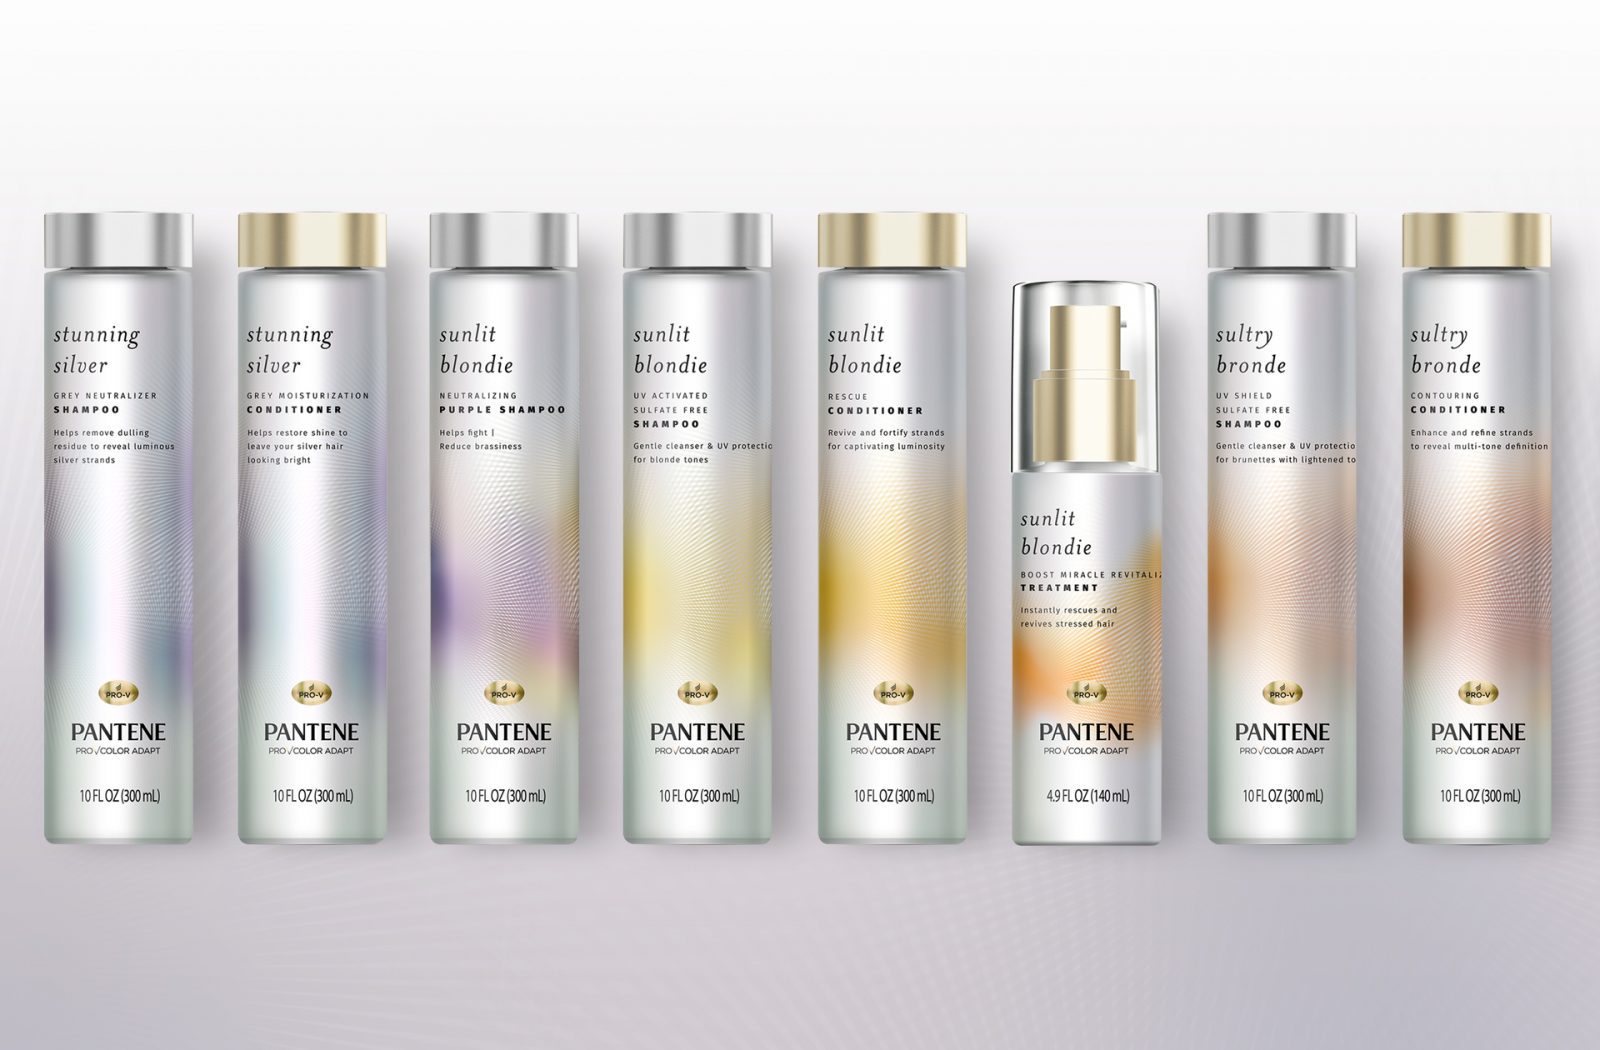 Render of a full product line of comps created for Pantene premium collection sales samples, featuring Premium and viable enhancements.